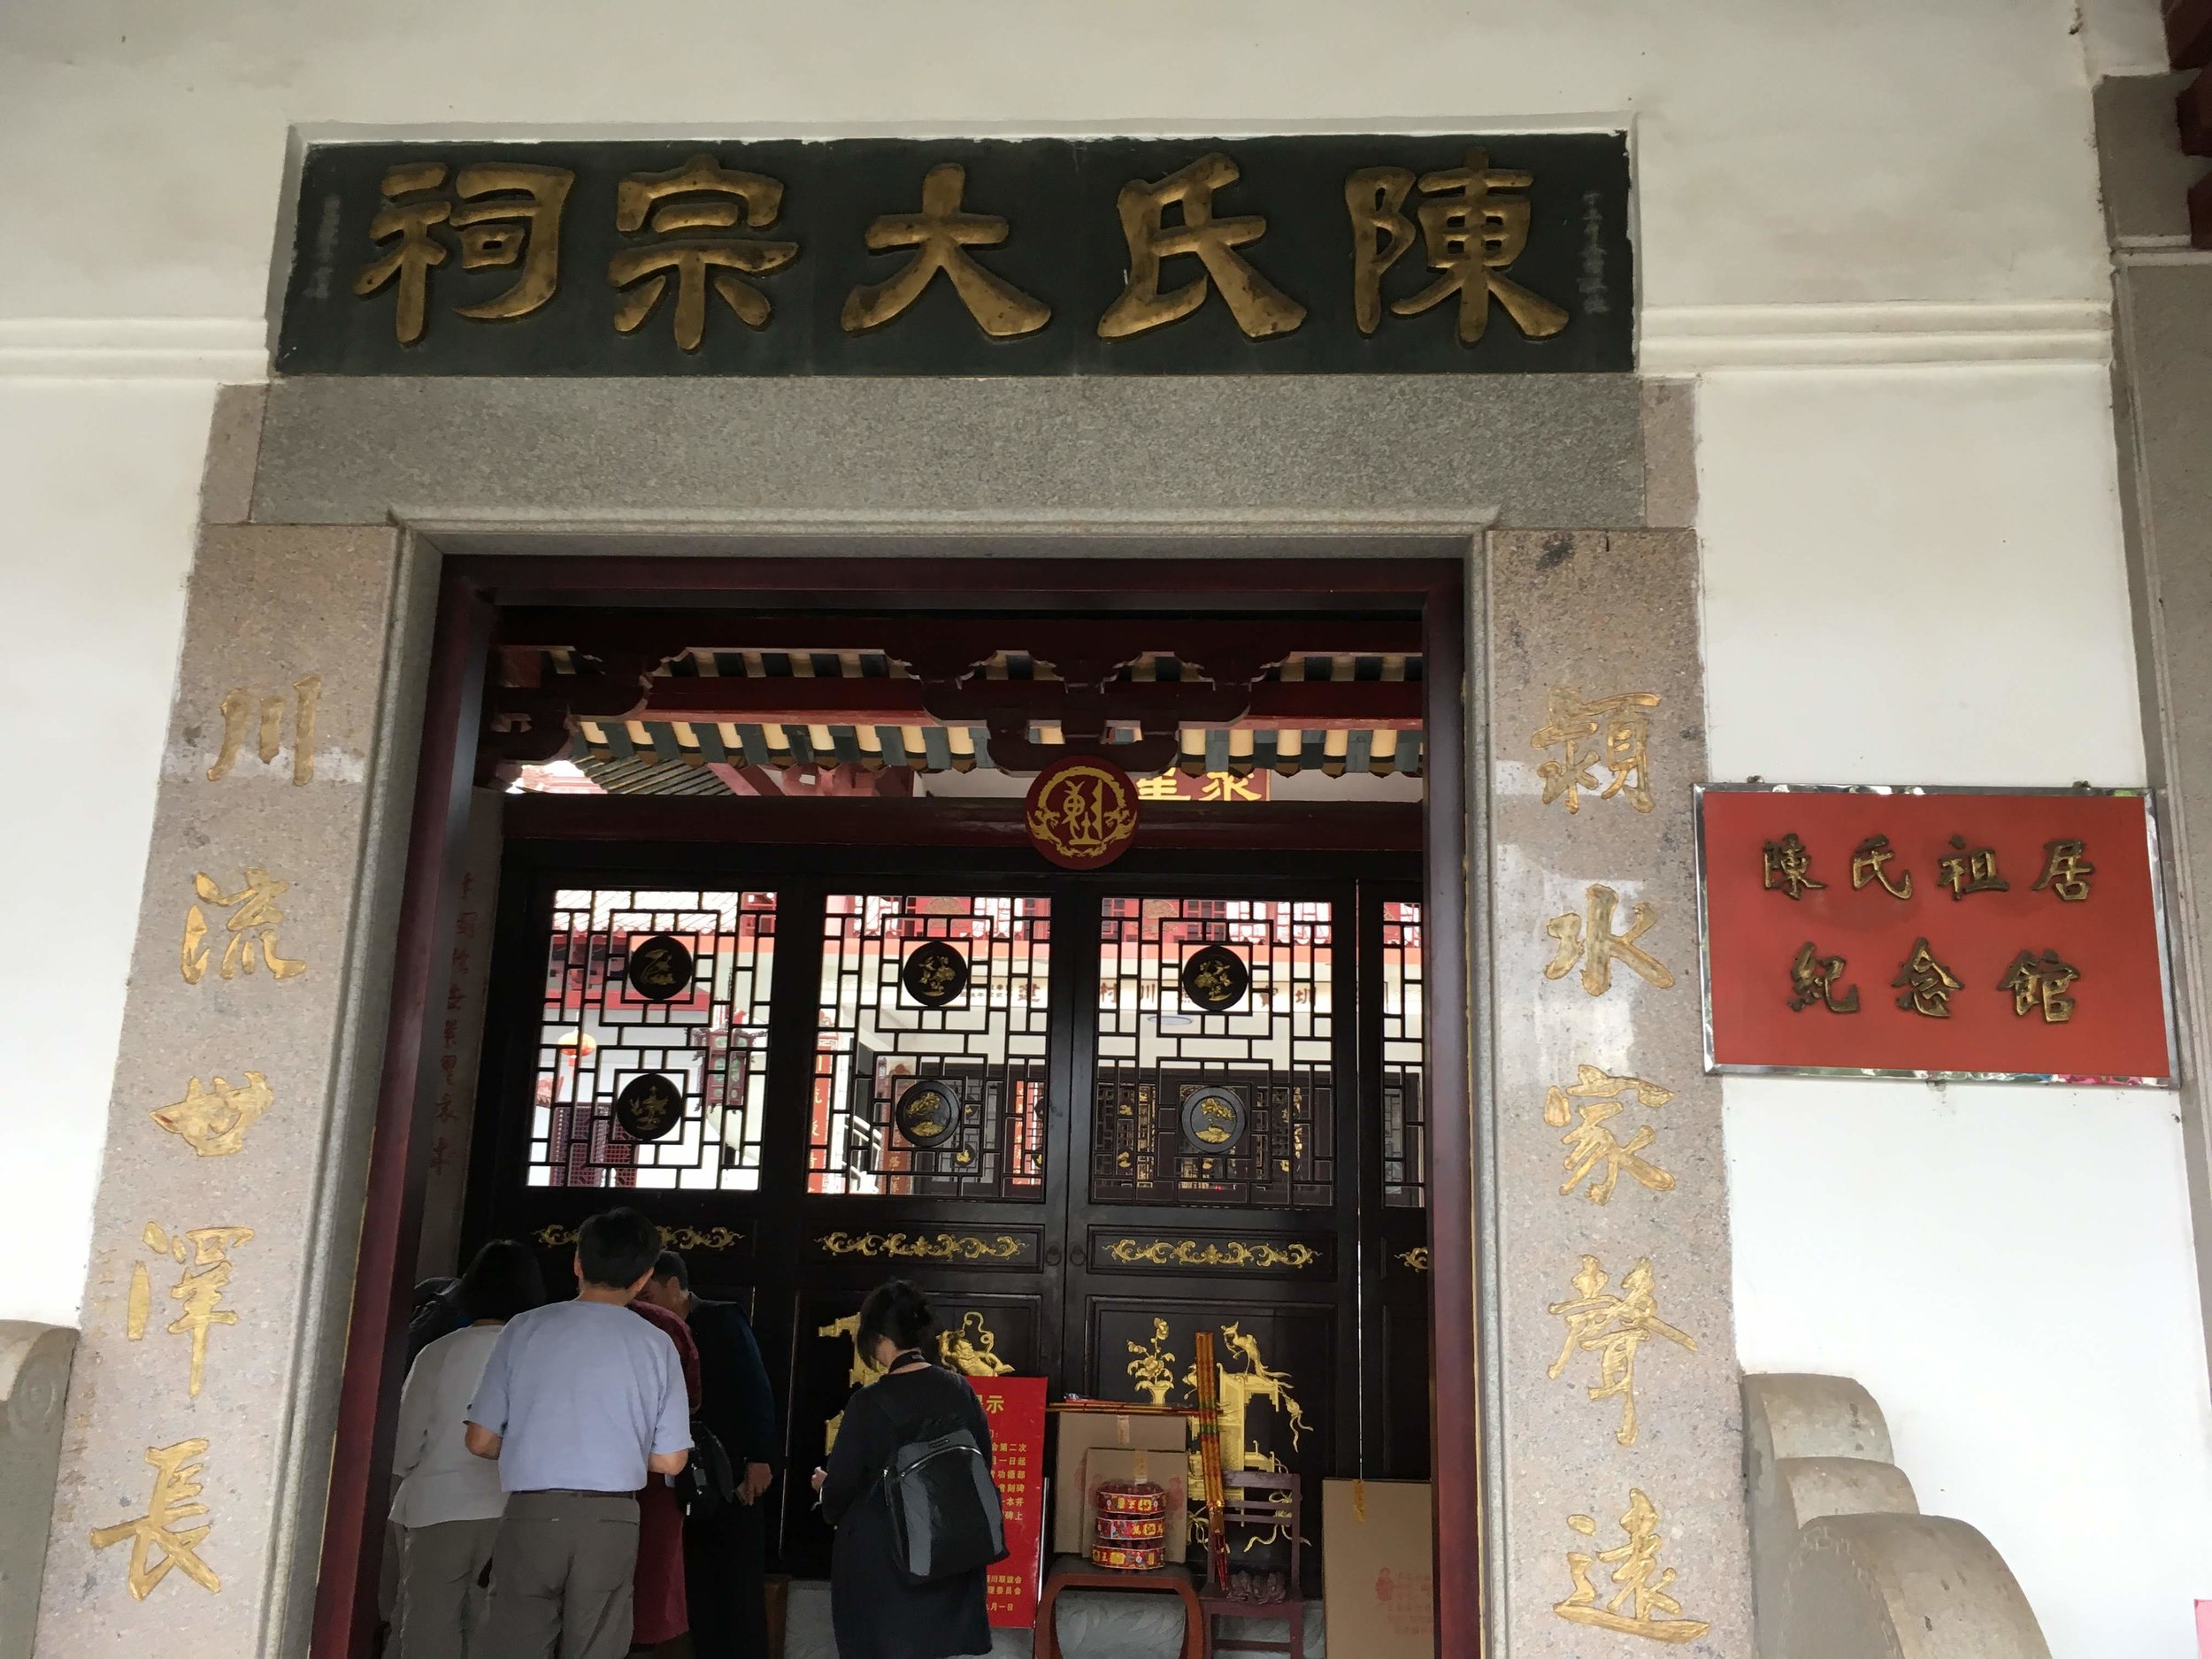 Entrance to the Chan Ancestral Hall